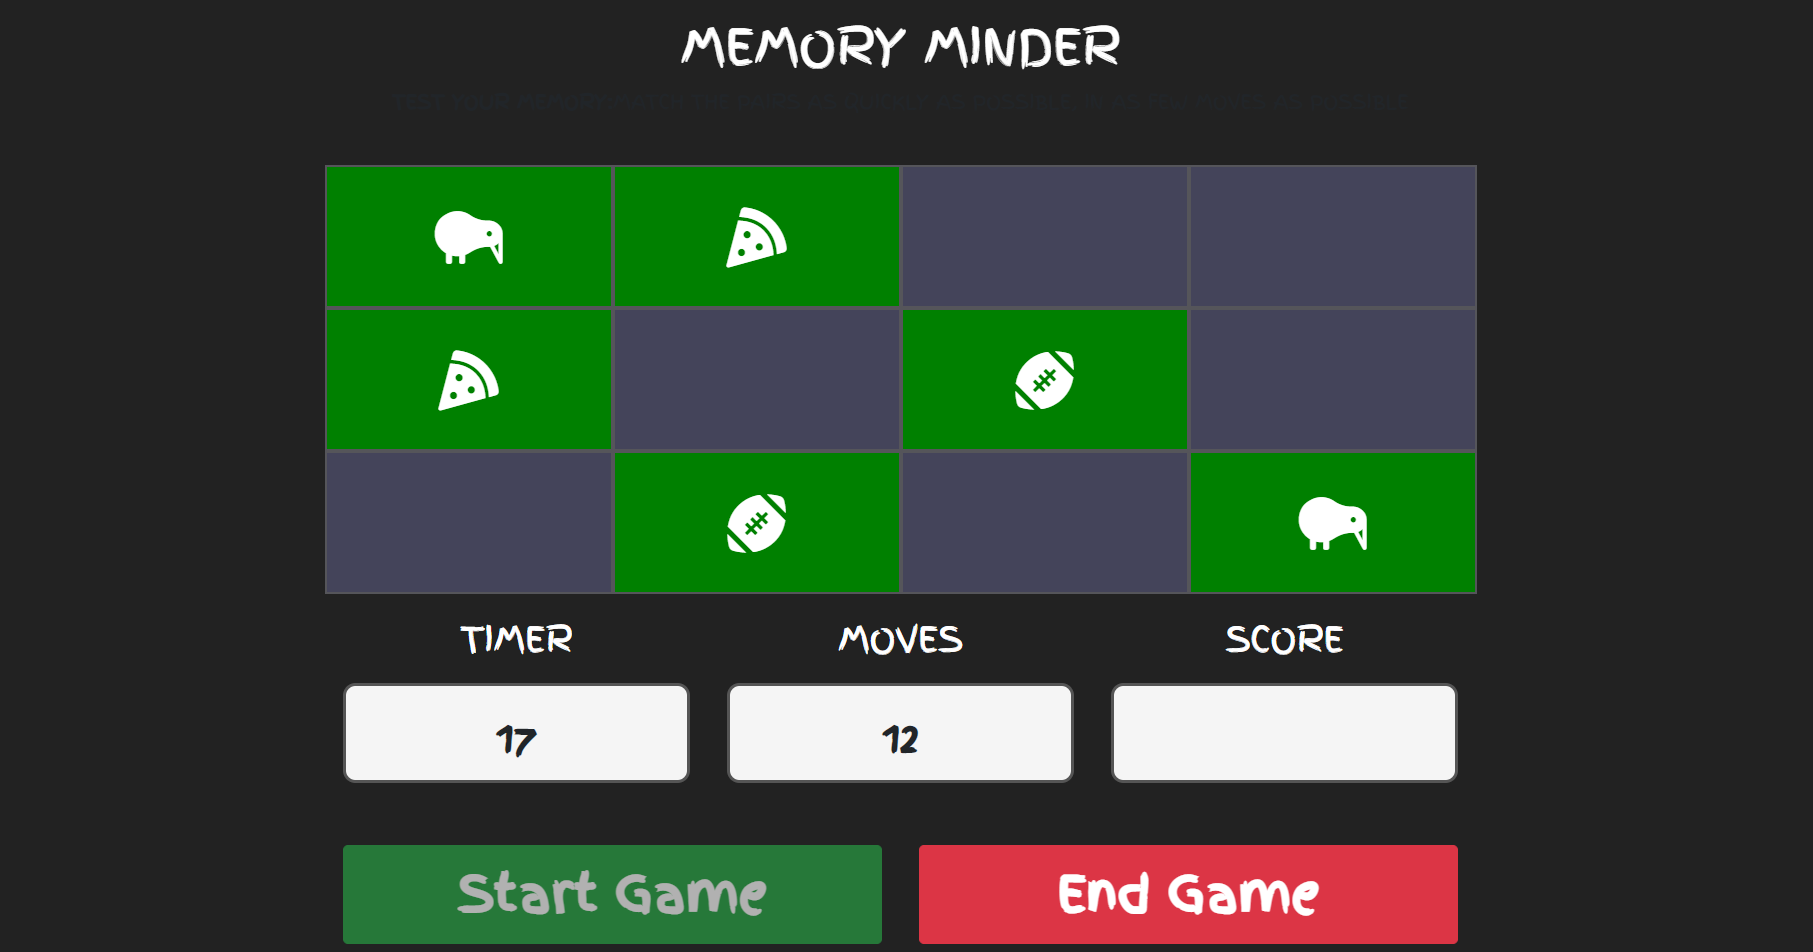 mmg - MEMORY MINDER GAME IN JAVASCRIPT WITH SOURCE CODE